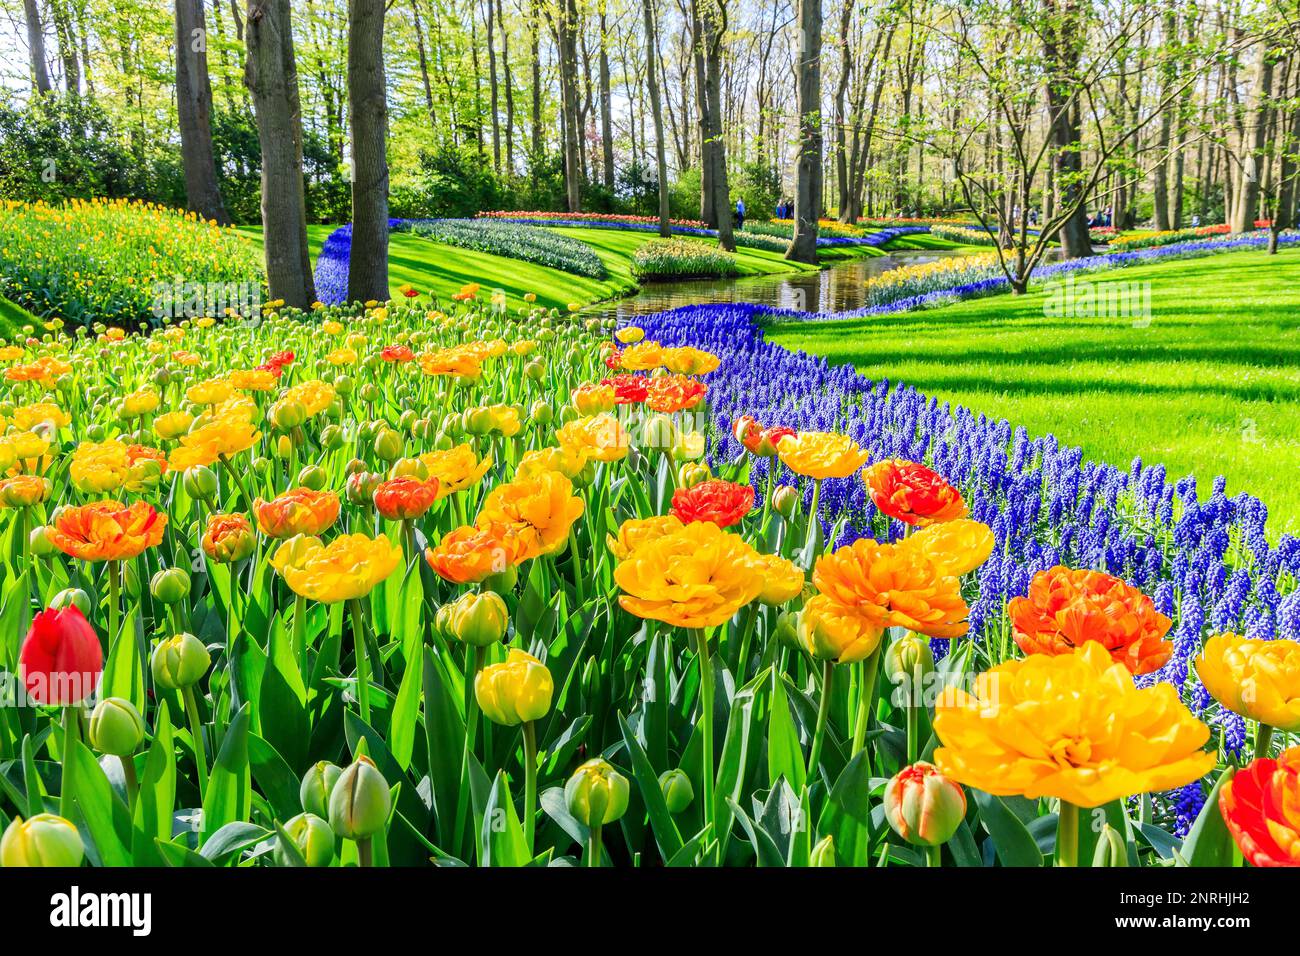 Blooming colorful tulips flowerbed at the public flower garden. Lisse, Holland, Netherlands. Stock Photo